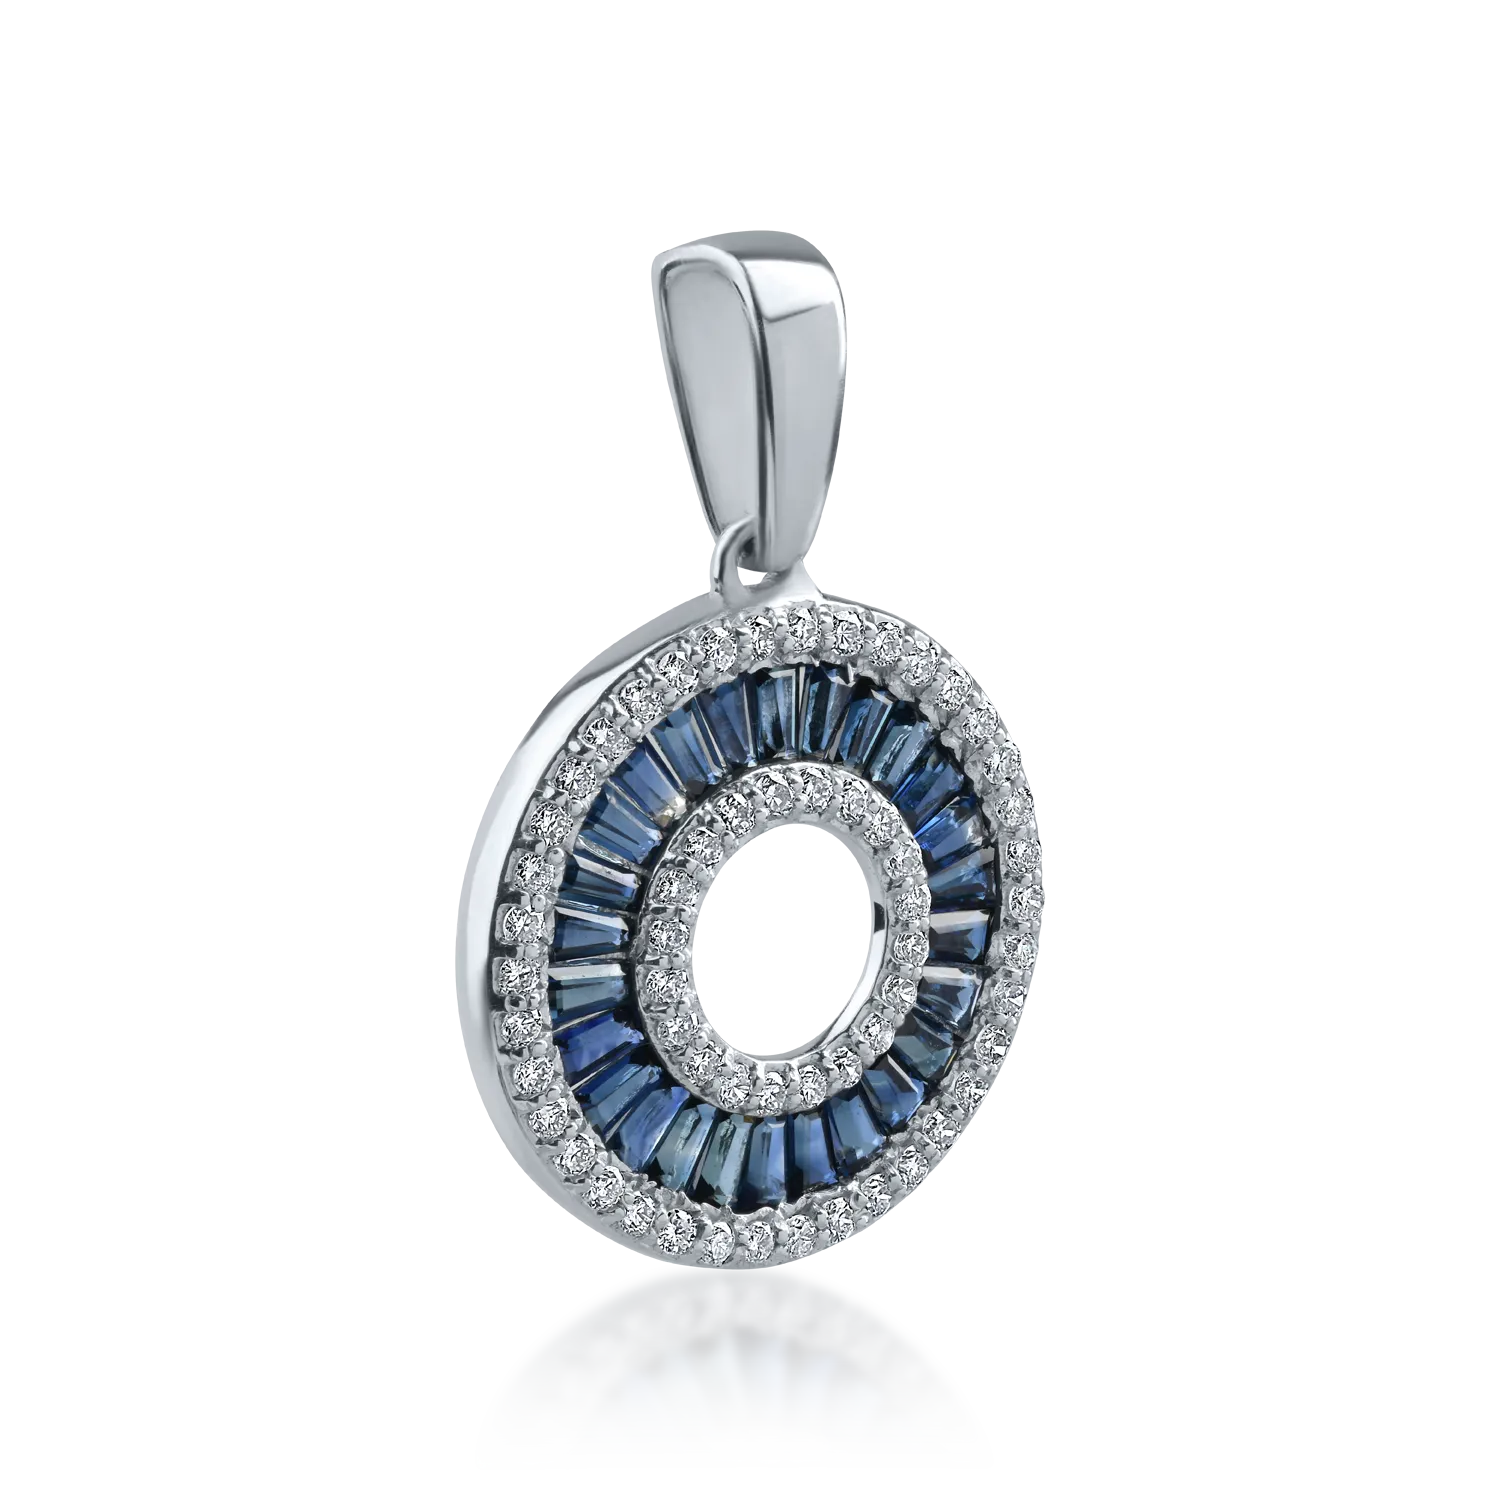 Round white gold pendant with 1.04ct heated sapphires and 0.352ct diamonds